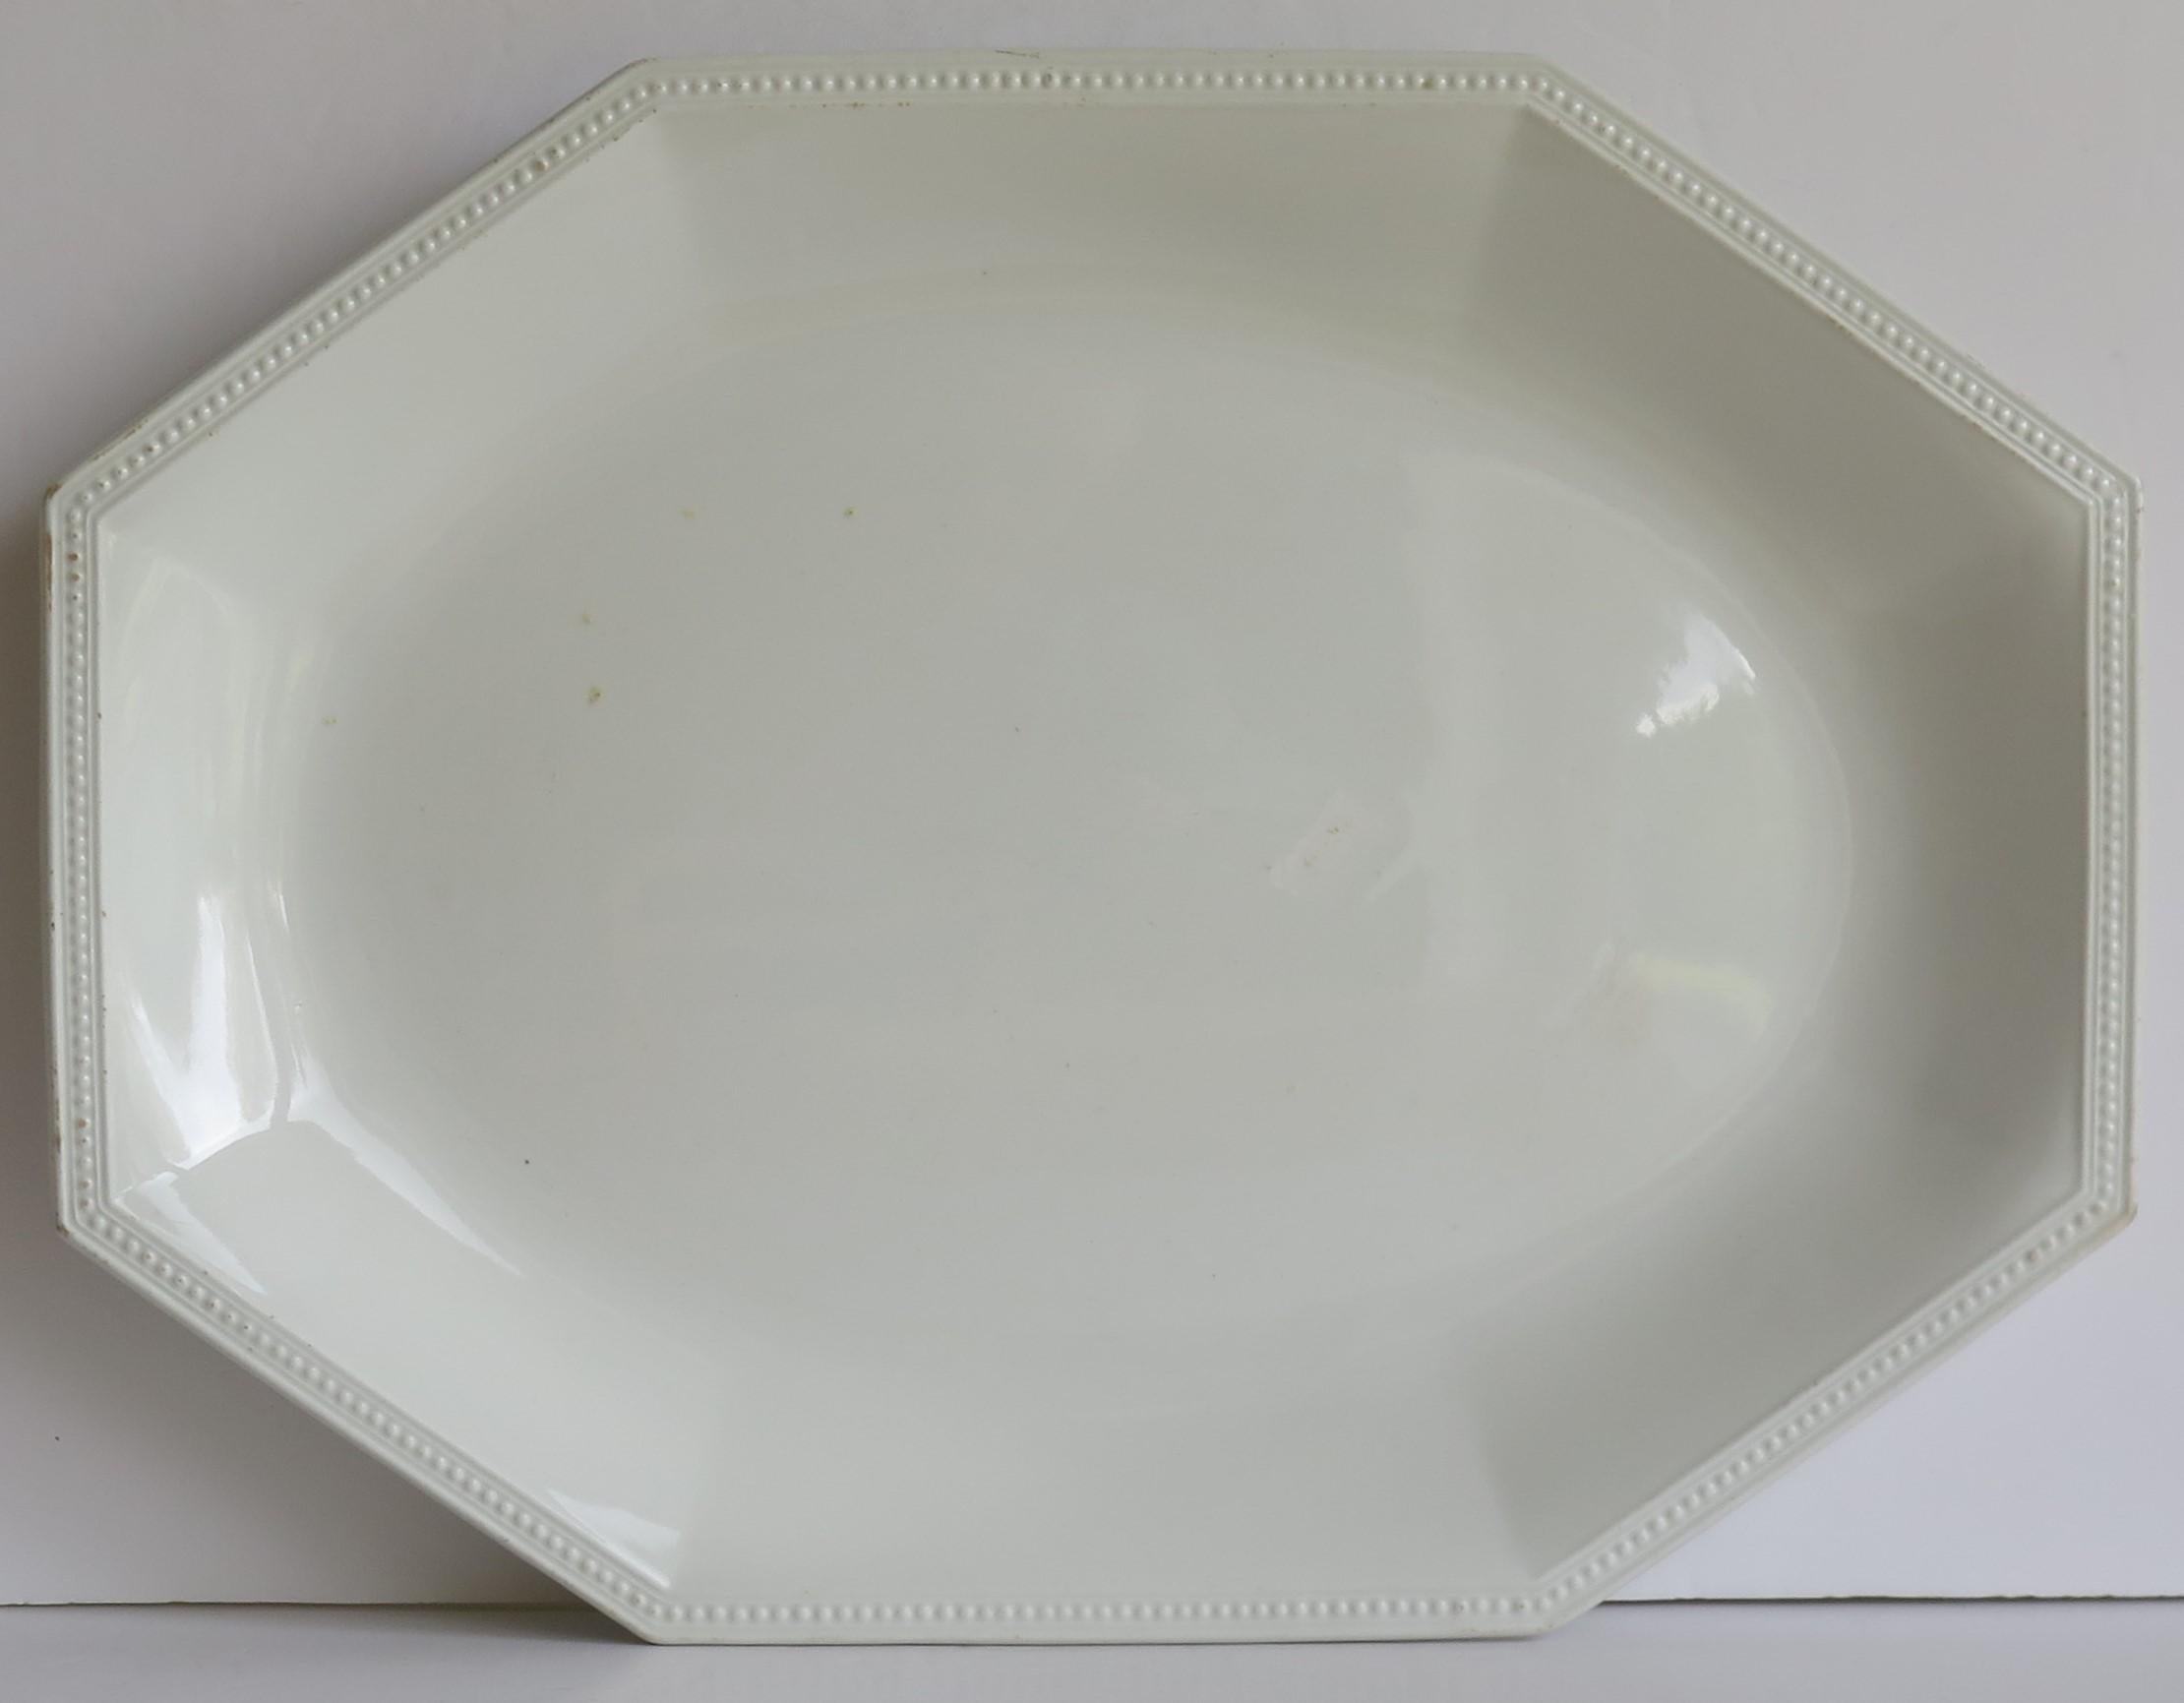 This is a good Mid-Century Modern, large, octagonal, white ironstone Platter, made by Johnson Brothers Staffordshire, England.

The platter is well potted with a moulded edge to the rim.

The pattern is called 